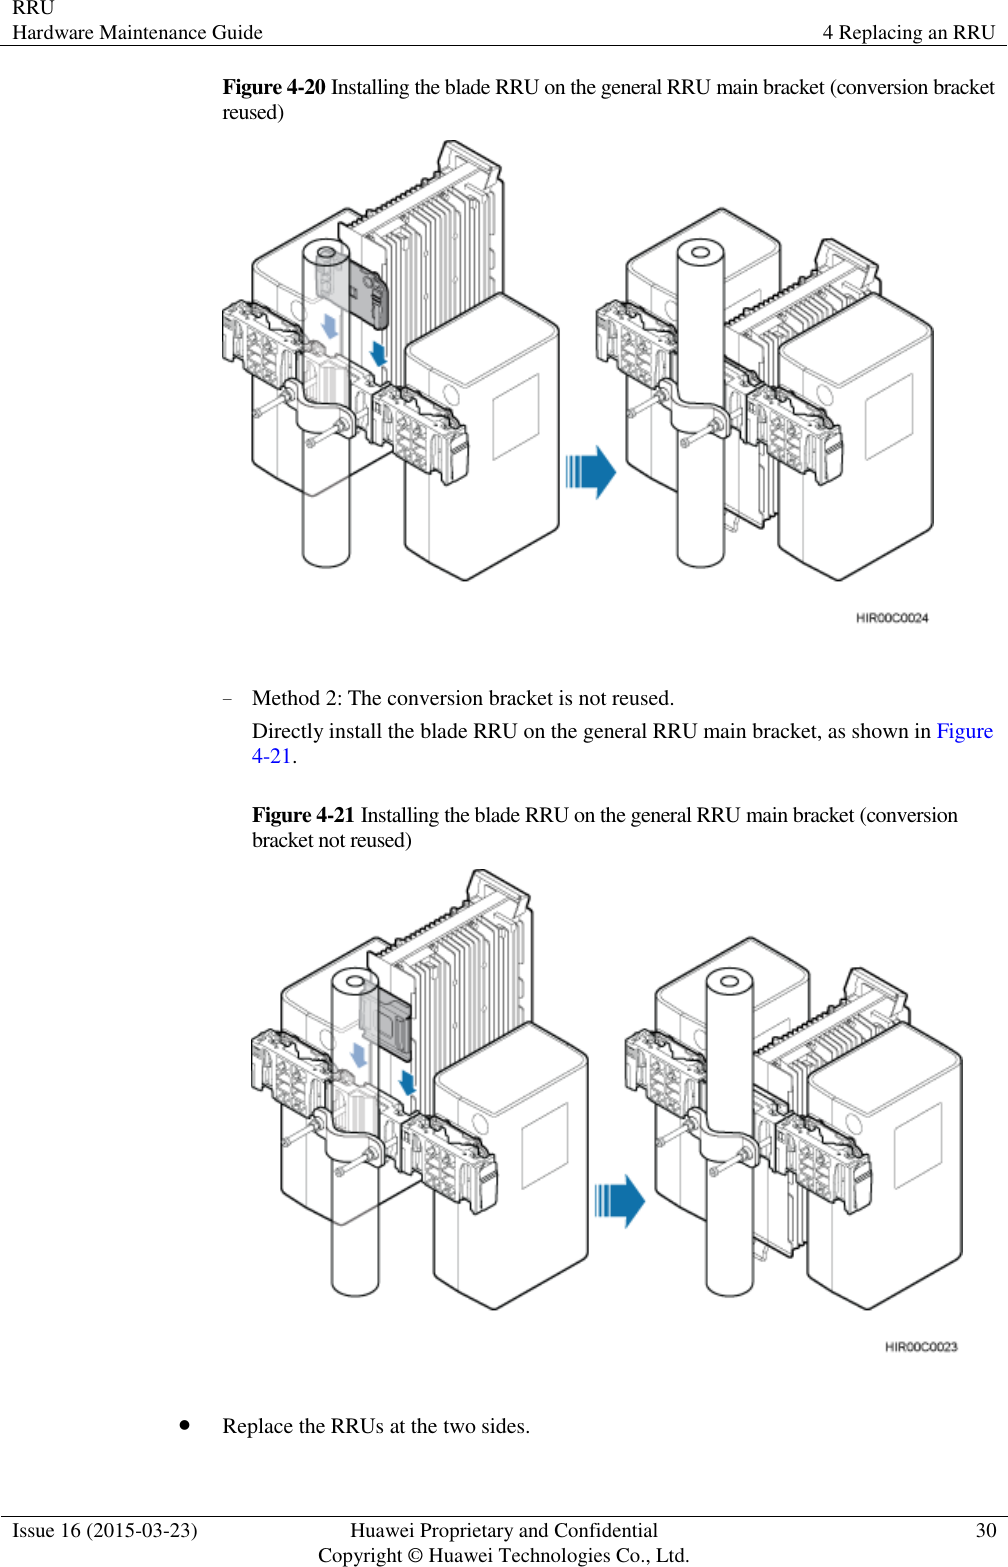 RRU Hardware Maintenance Guide 4 Replacing an RRU  Issue 16 (2015-03-23) Huawei Proprietary and Confidential                                     Copyright © Huawei Technologies Co., Ltd. 30  Figure 4-20 Installing the blade RRU on the general RRU main bracket (conversion bracket reused)   − Method 2: The conversion bracket is not reused. Directly install the blade RRU on the general RRU main bracket, as shown in Figure 4-21. Figure 4-21 Installing the blade RRU on the general RRU main bracket (conversion bracket not reused)    Replace the RRUs at the two sides. 